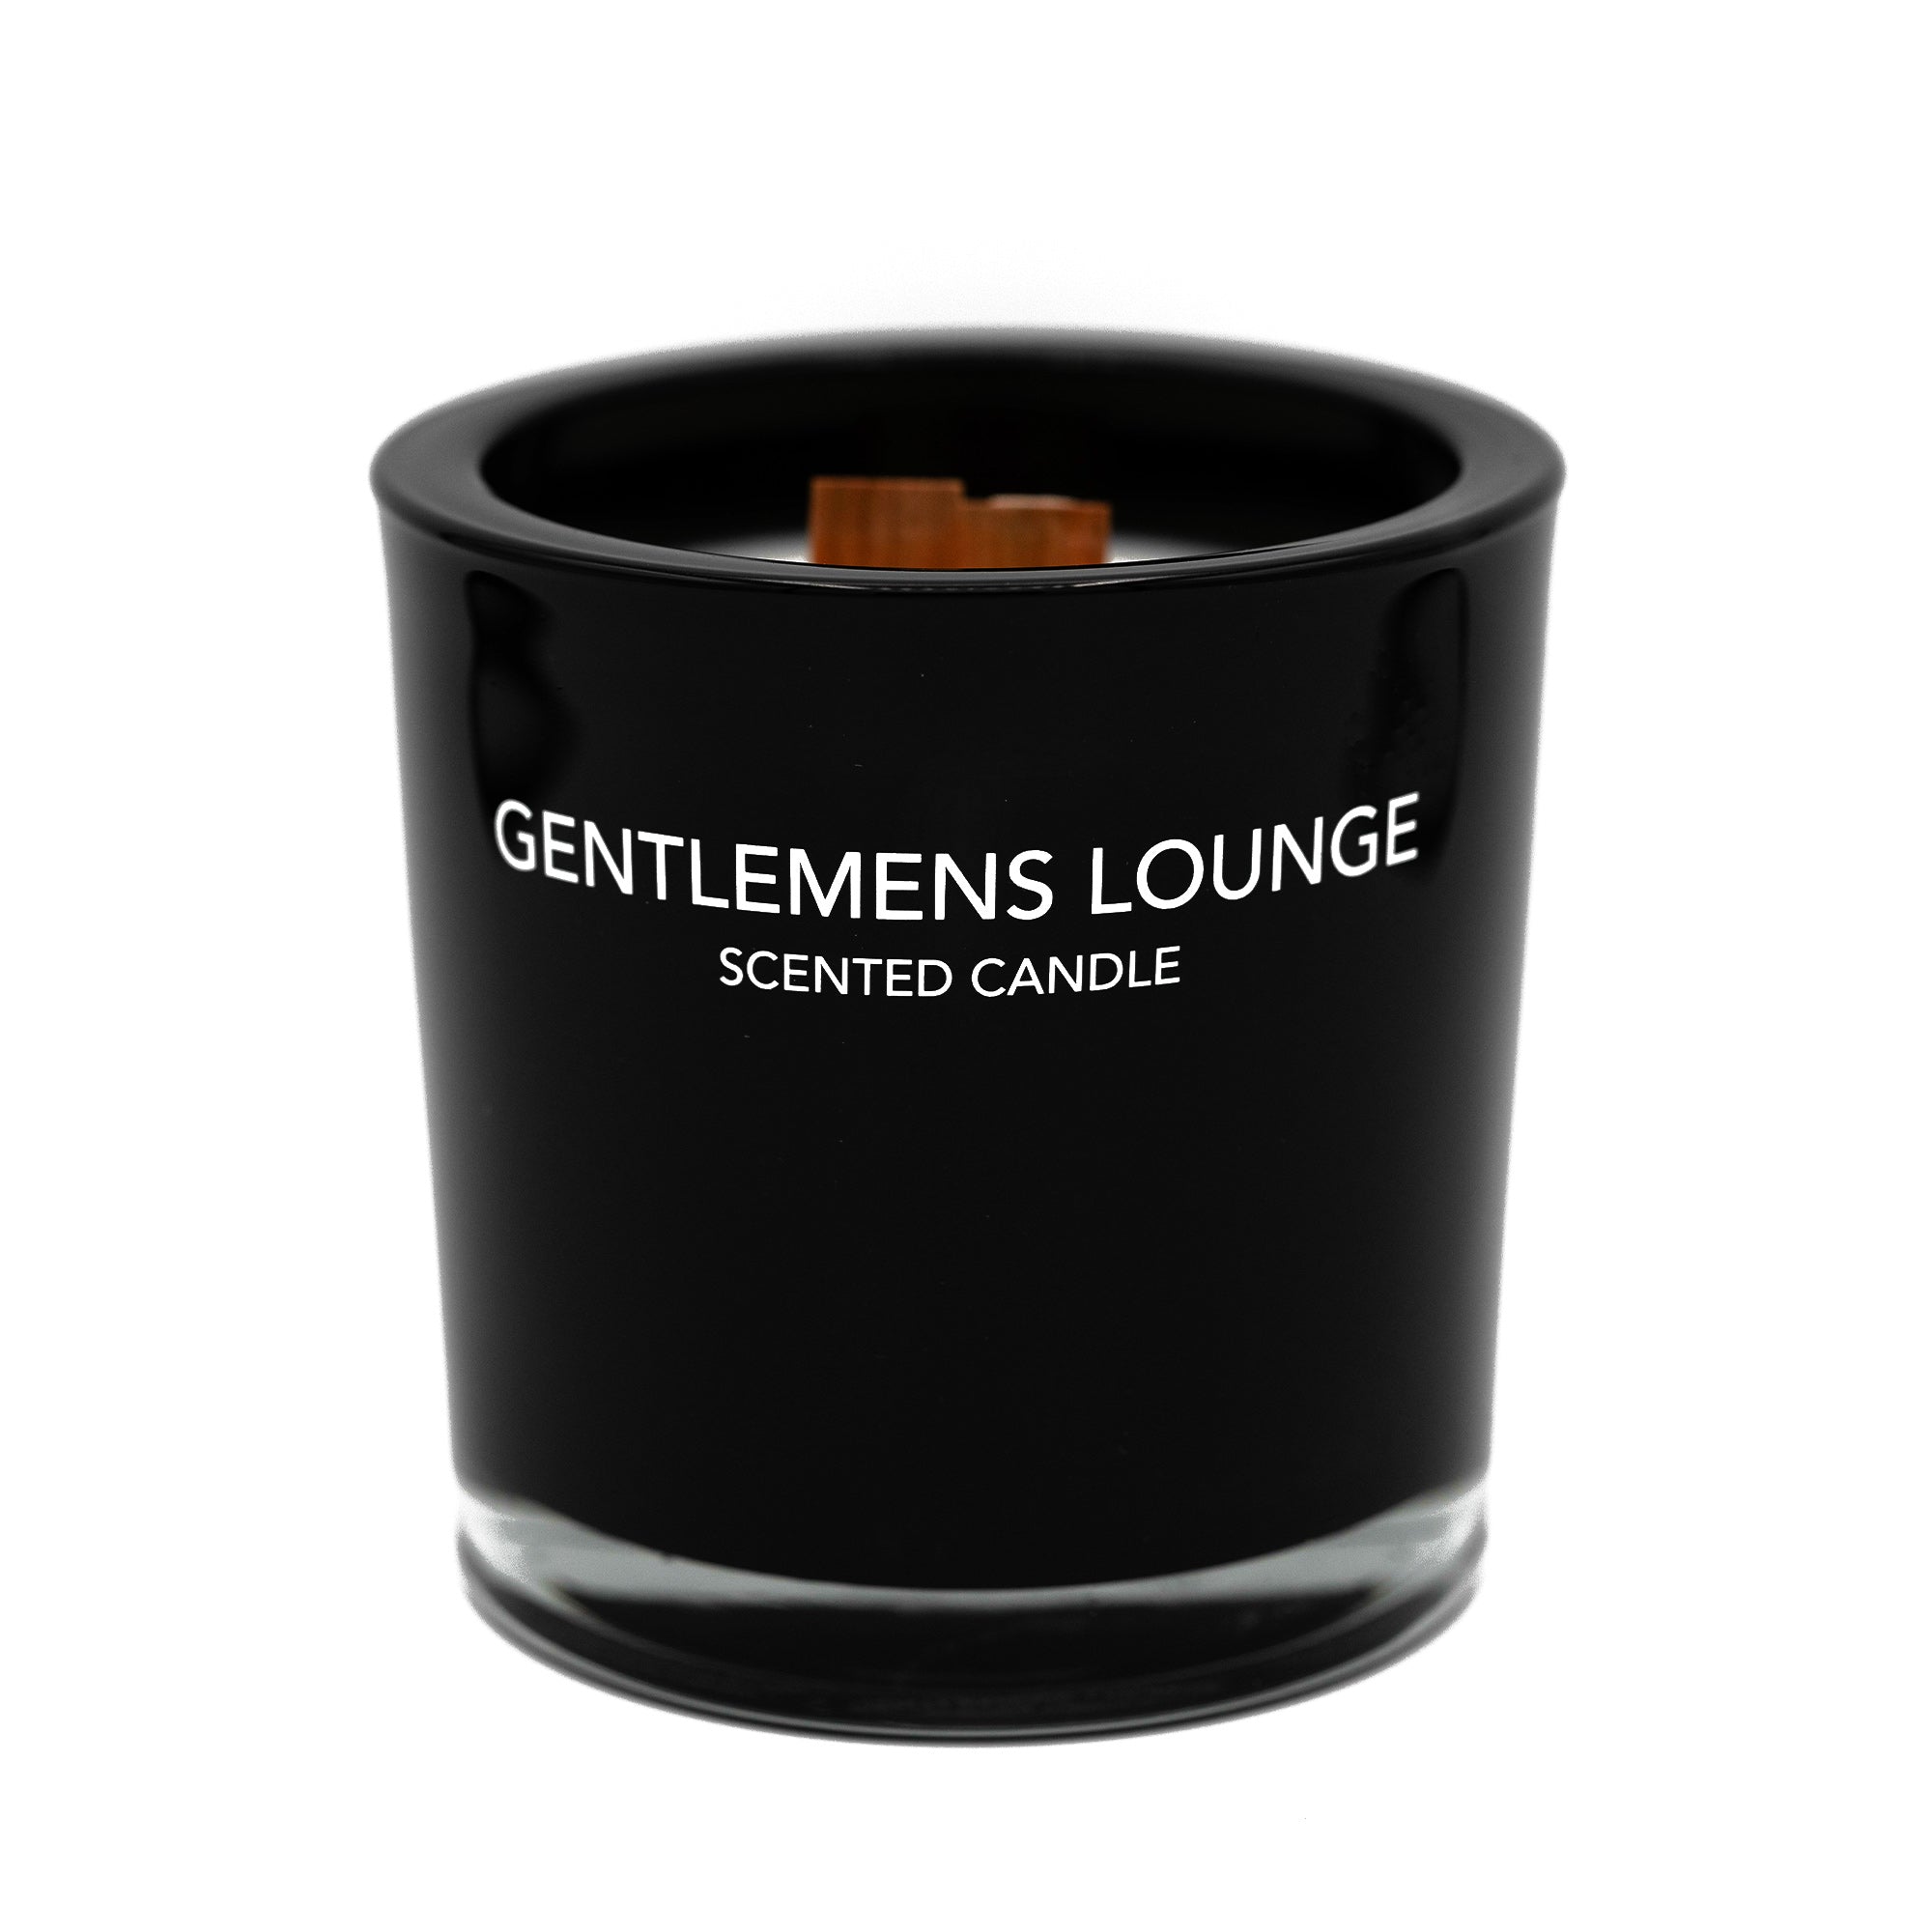 GENTLEMENS LOUNGE Scented Candle - Fragrance One